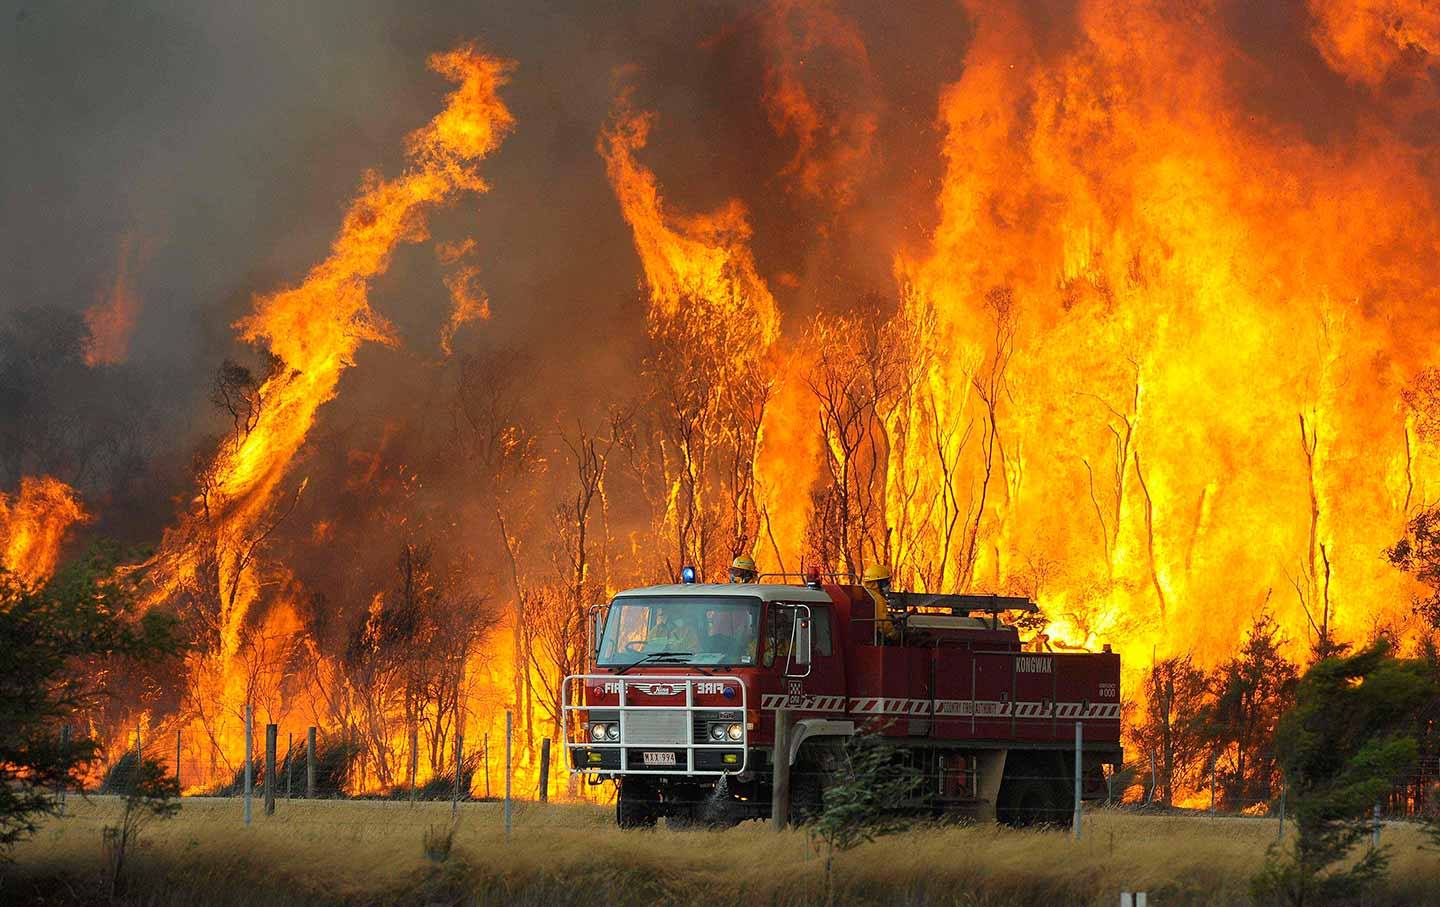 The Western US Swelters While Canada Buckles Up With An Emergency Plan To Control Wildfires